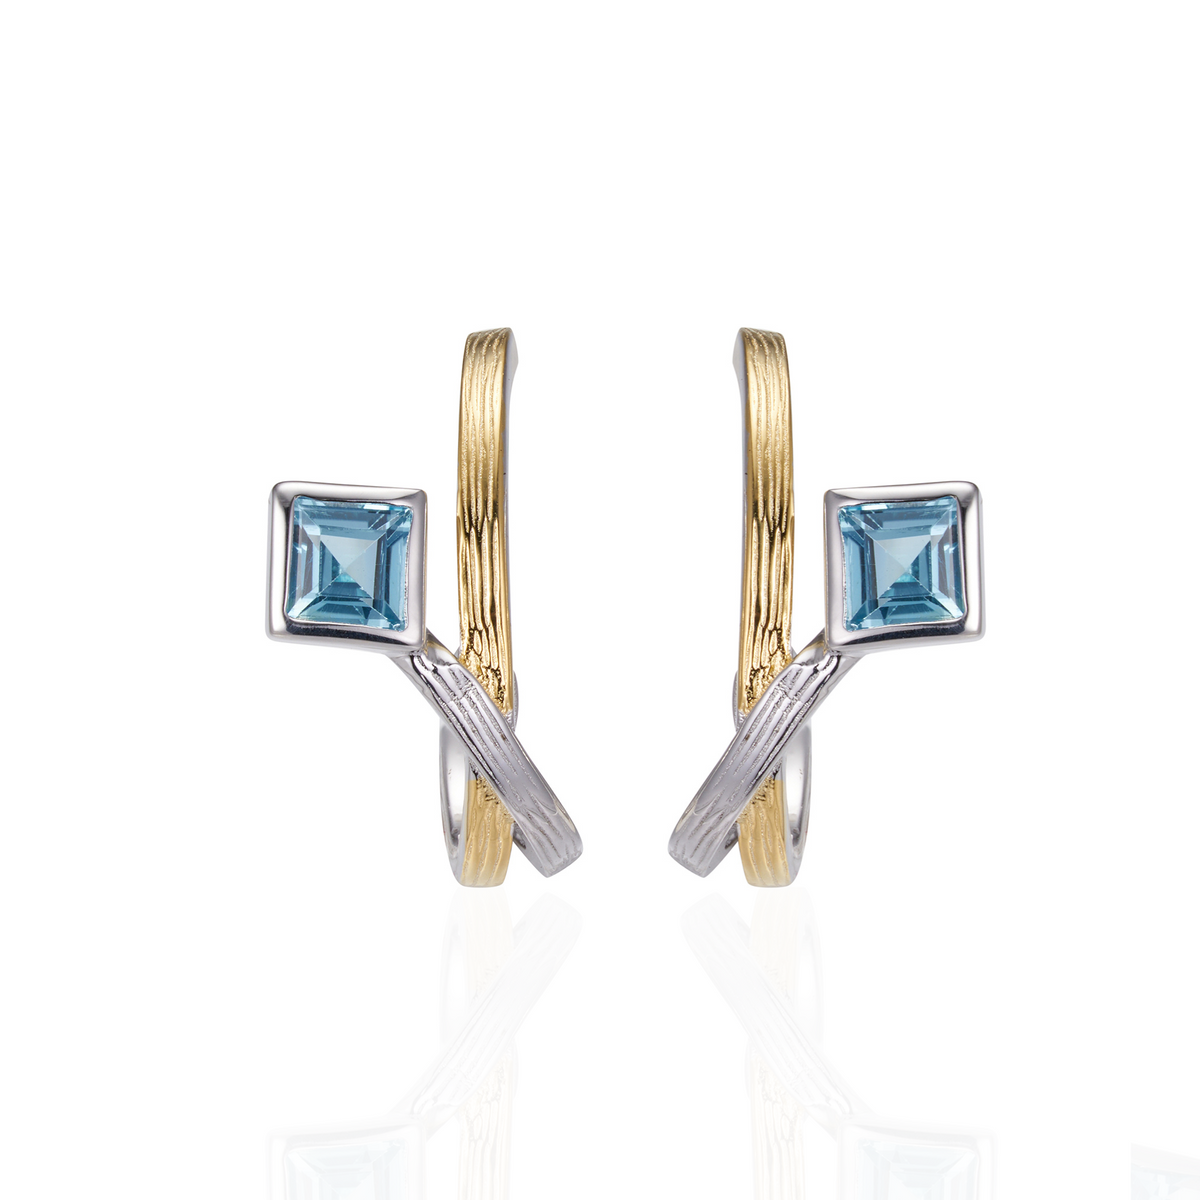 A pair of silver earrings gold plated with square blue topaz stones.